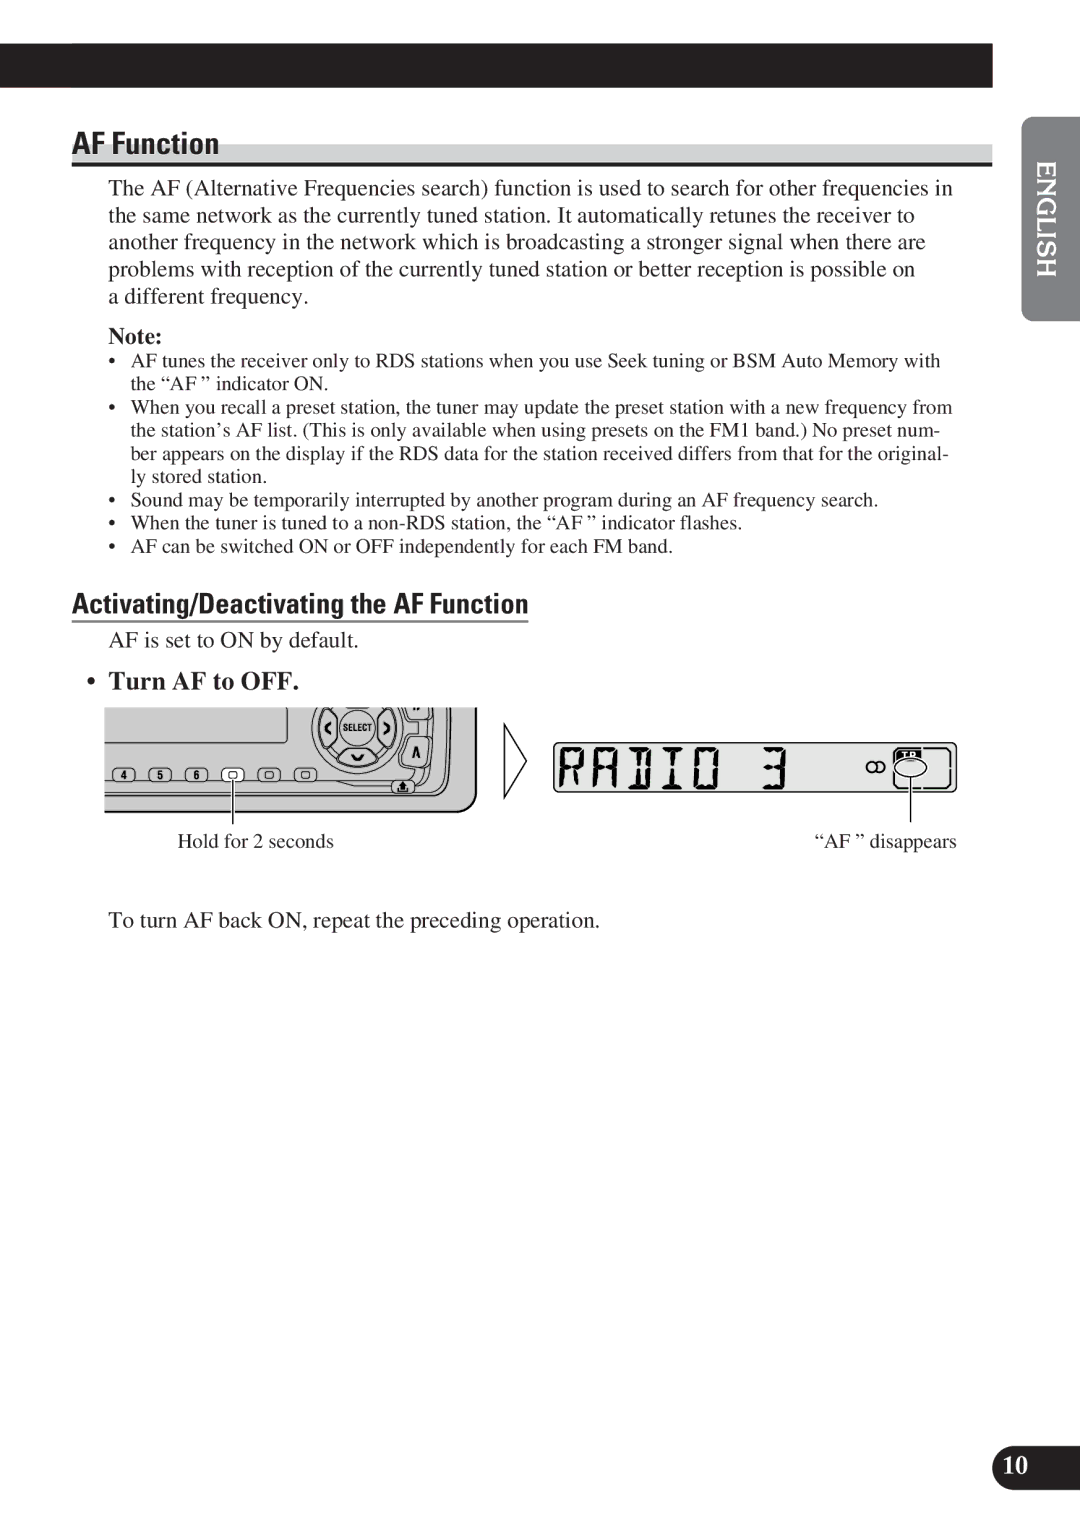 Pioneer DEH-2100R, DEH-2130R operation manual Title English, Activating/Deactivating the AF Function, Turn AF to OFF 